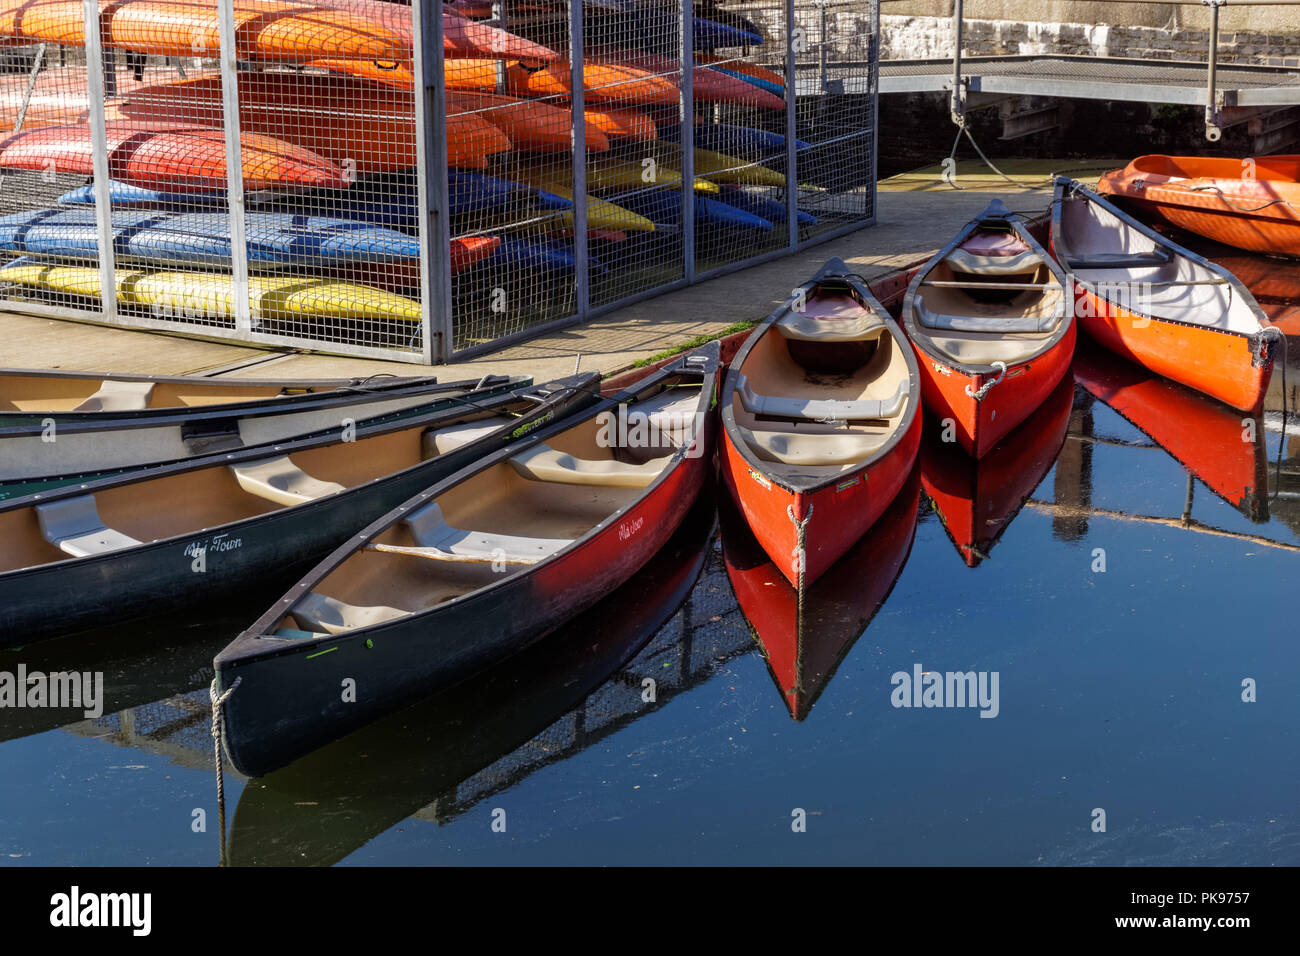 Canoes for rent in Shadwell Basin, London England United Kingdom UK Stock Photo